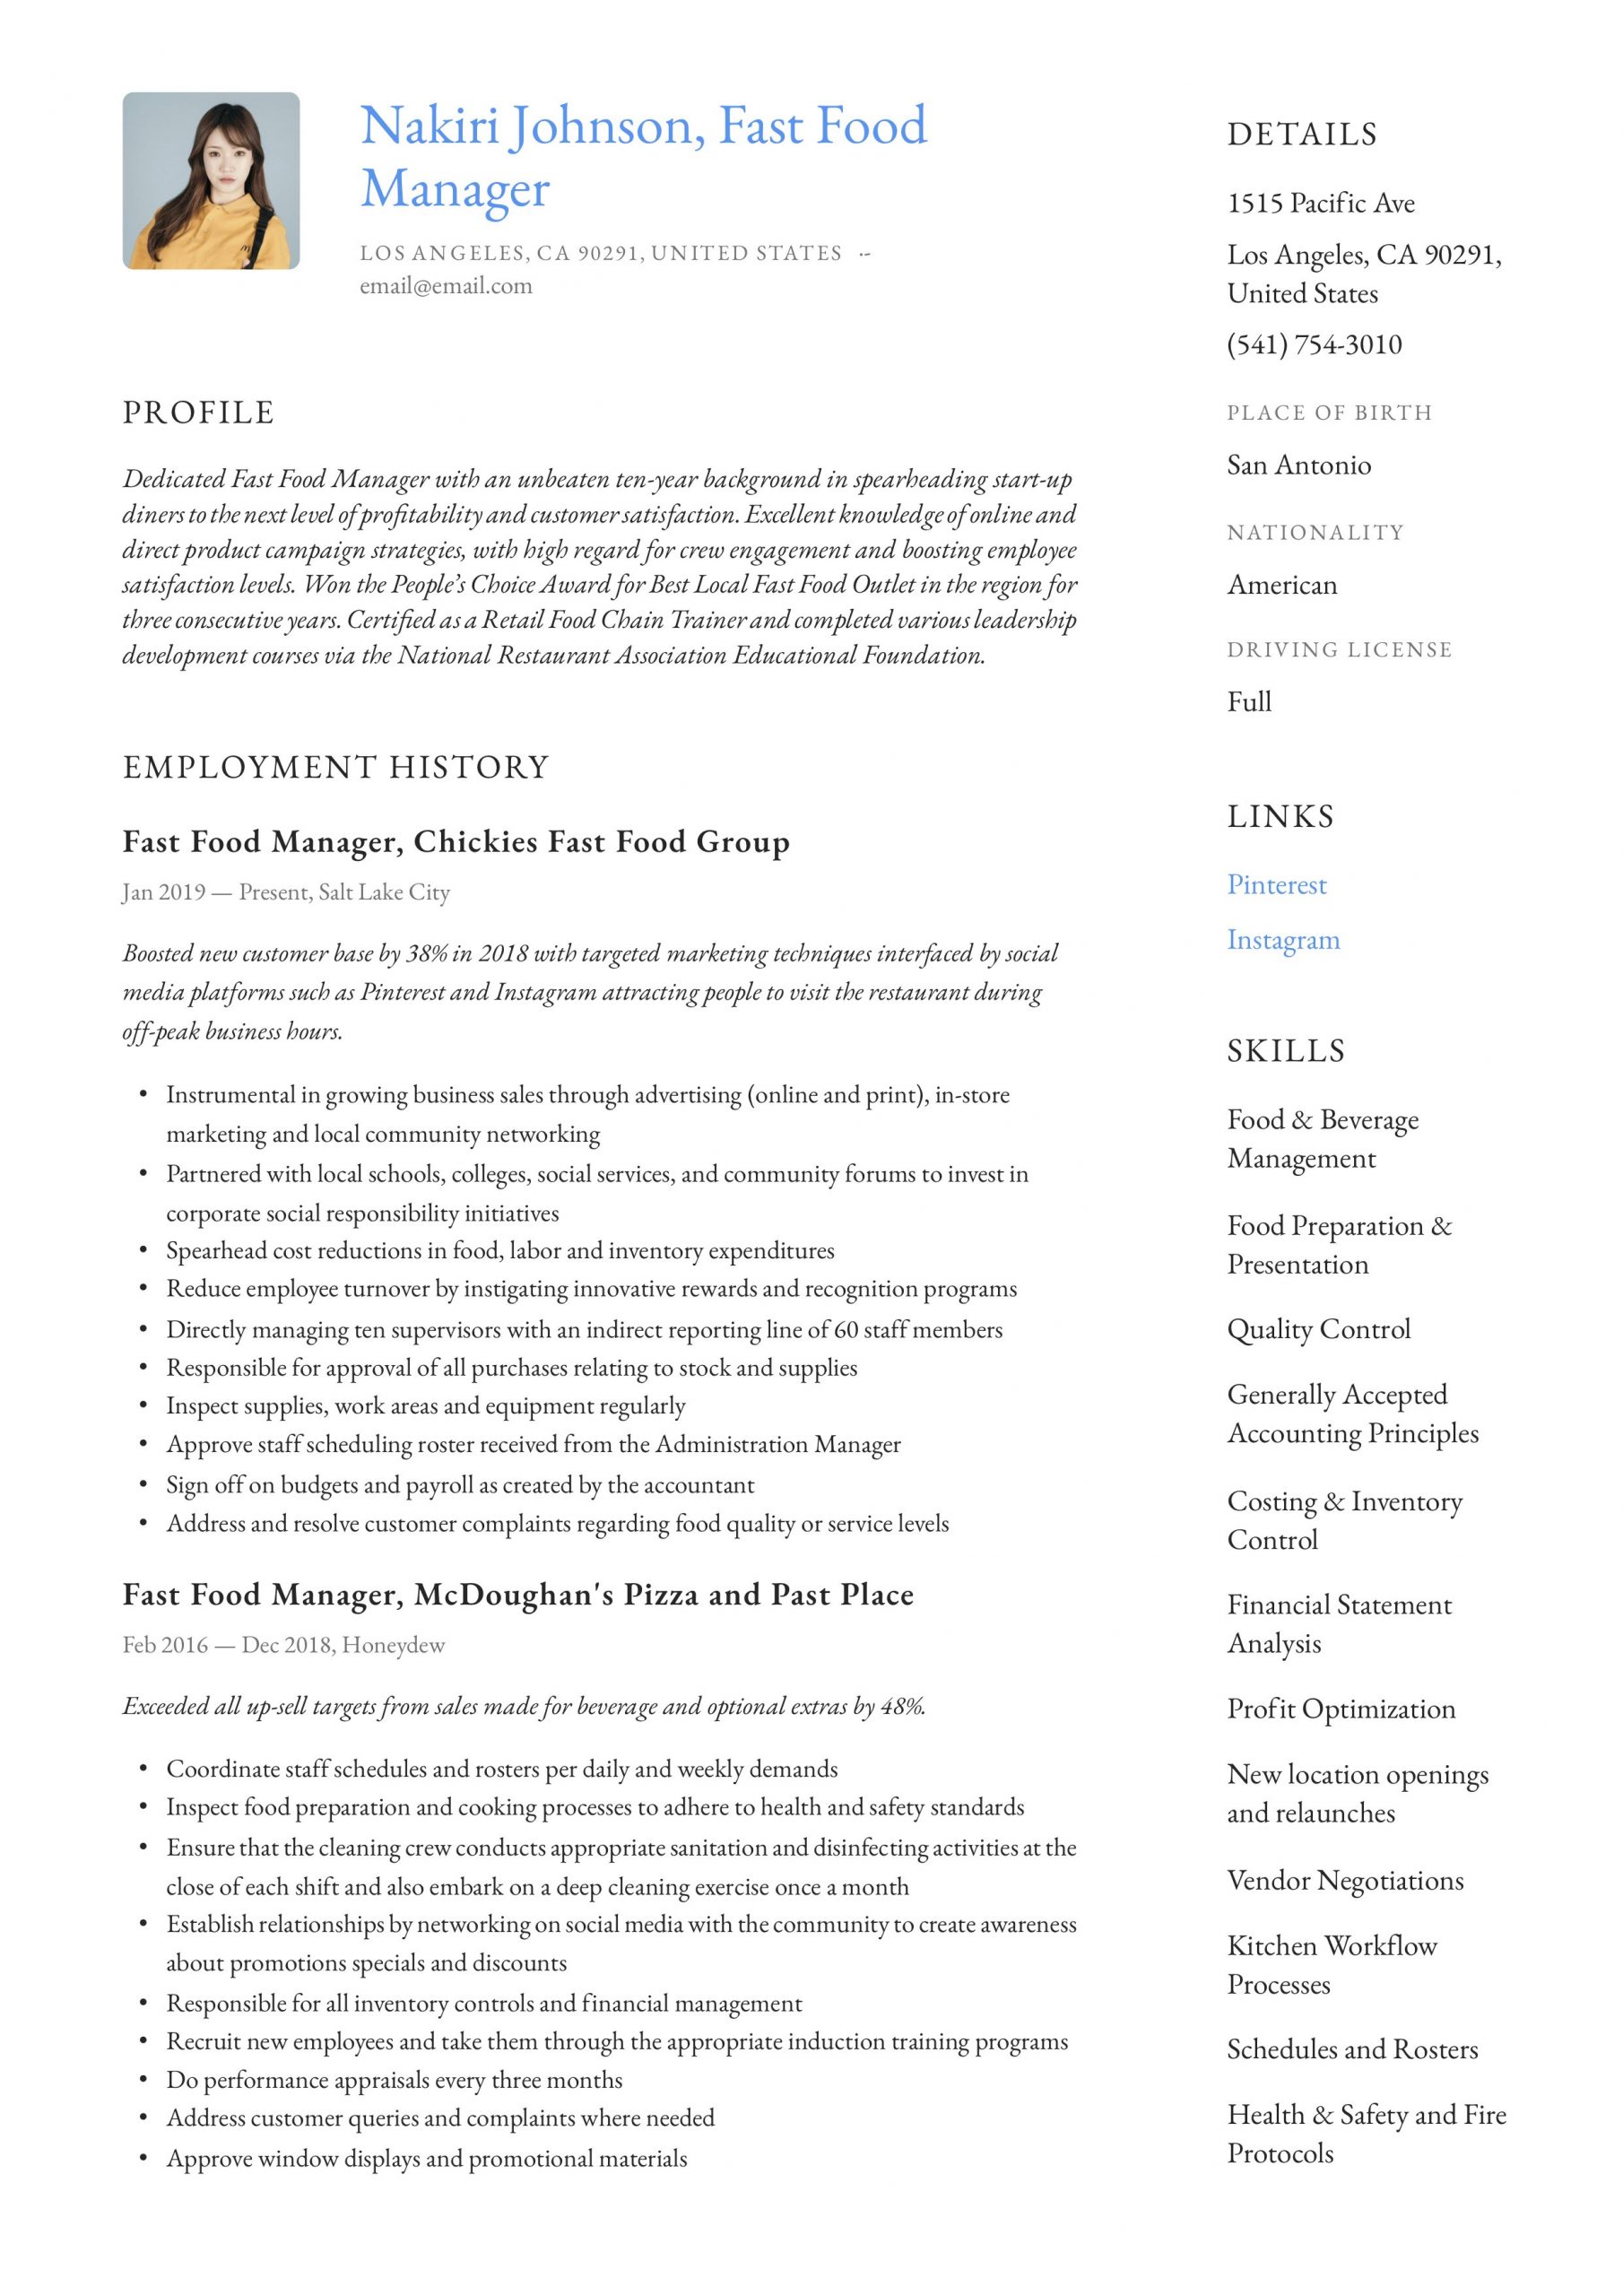 Sample Resume with Fast Food Experience Fast Food Manager Resume & Writing Guide  12 Examples 2020